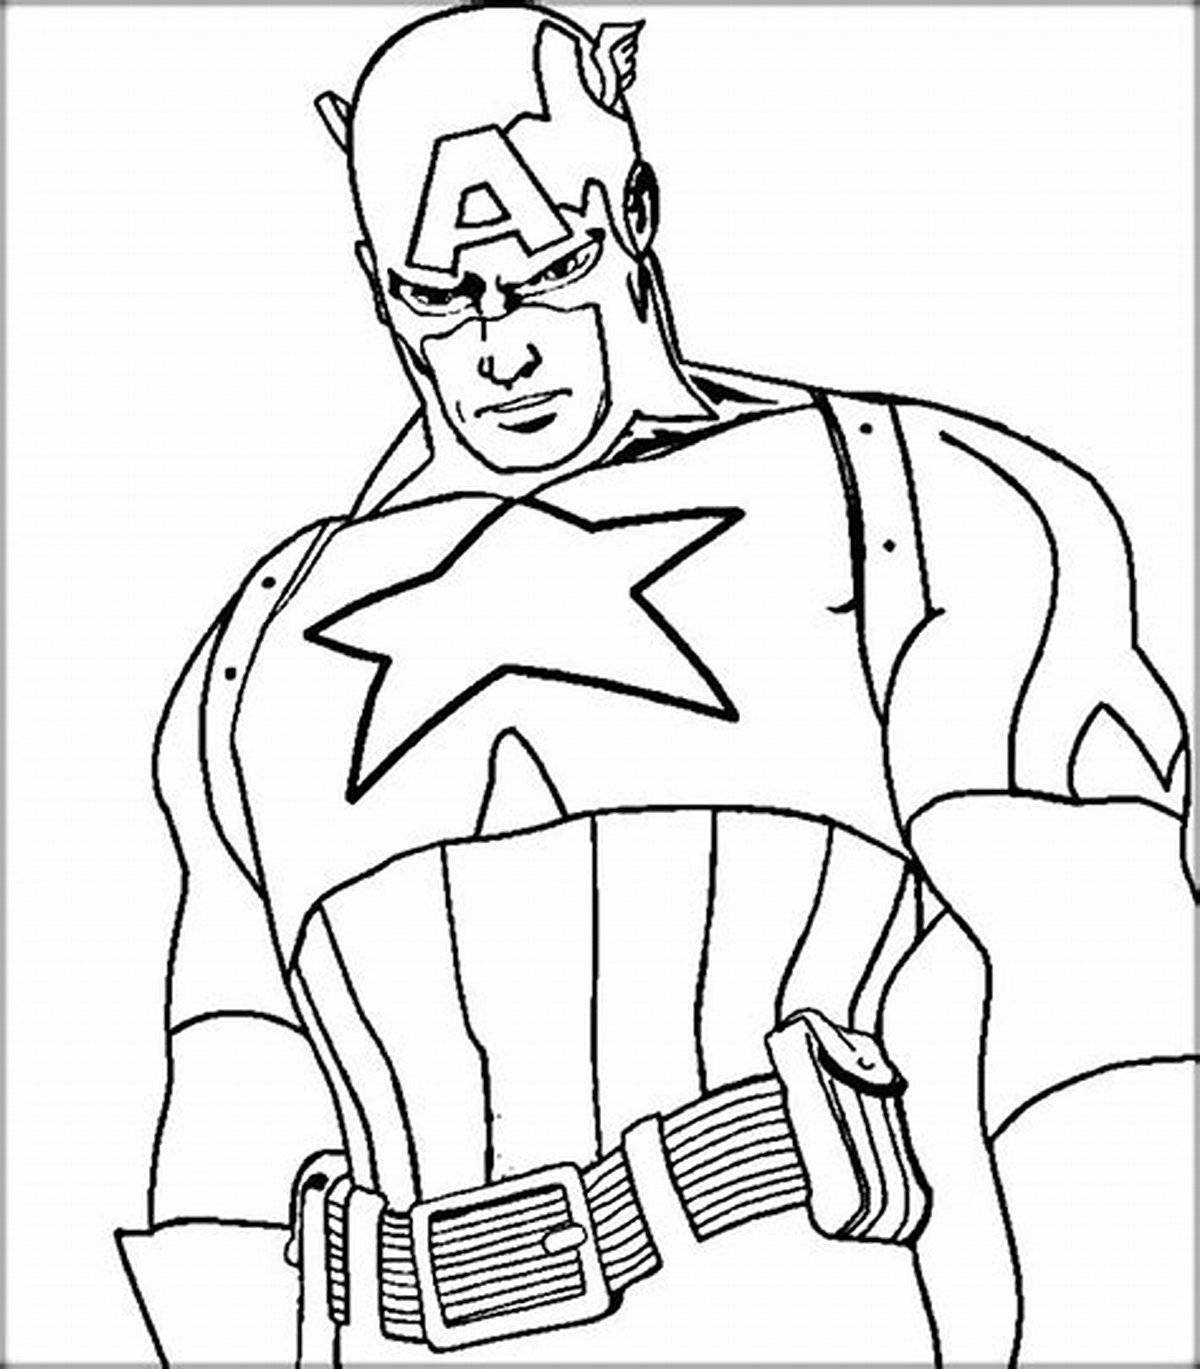 Captain America awesome coloring book for boys